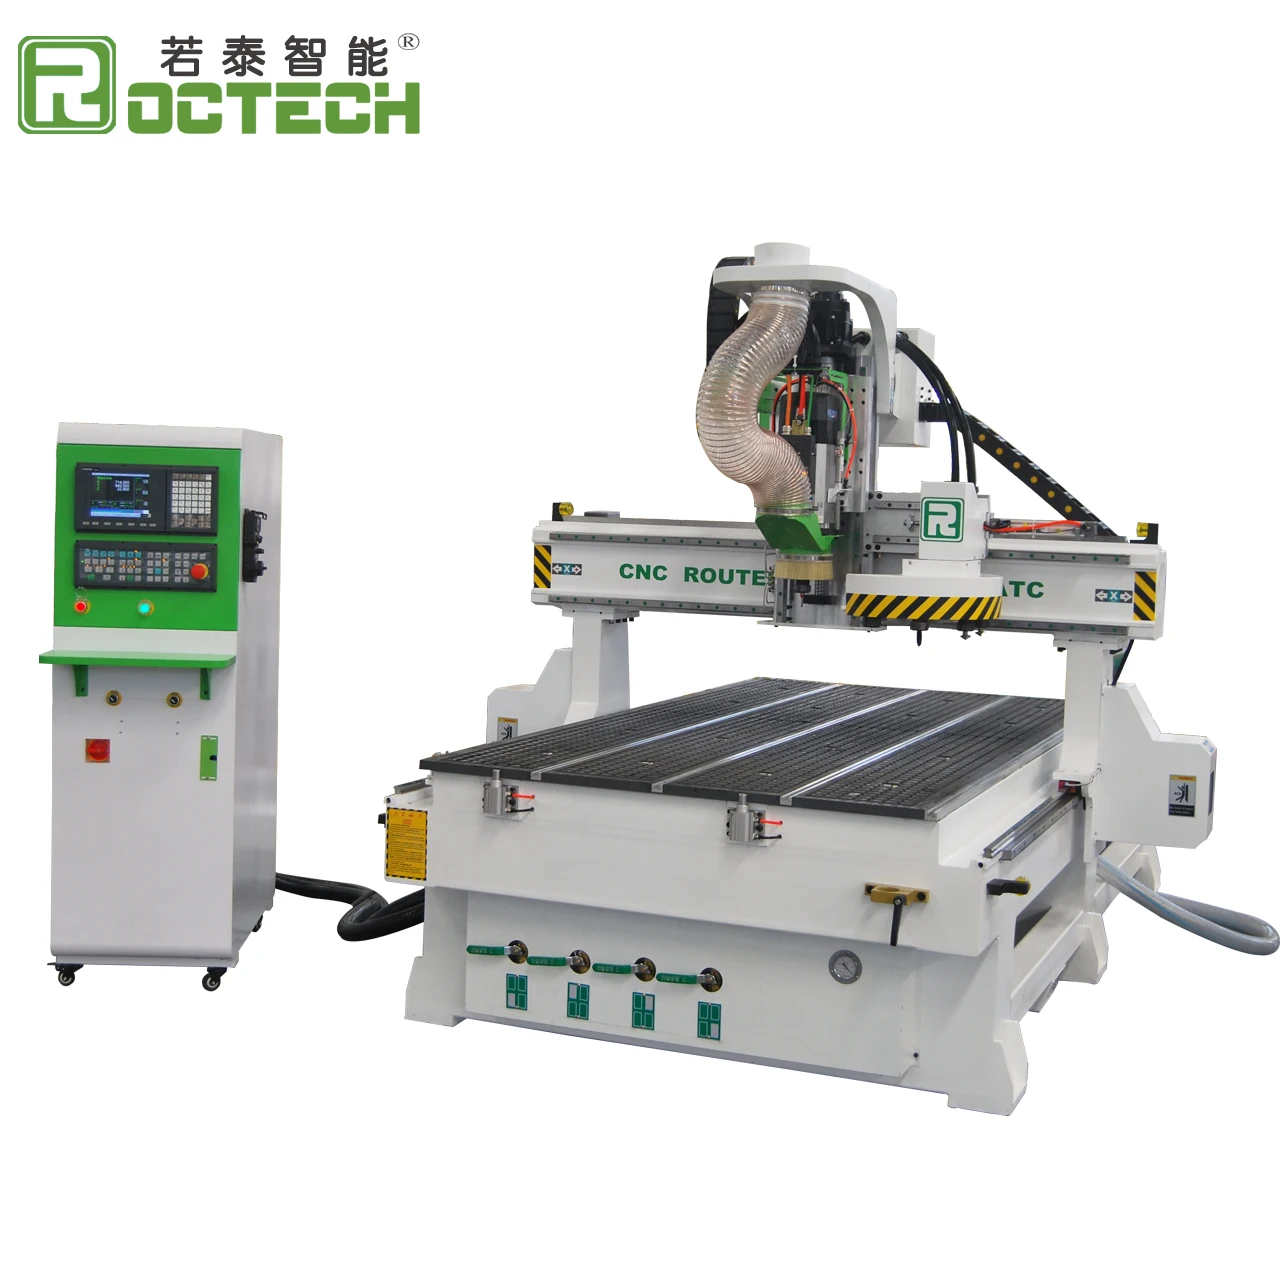 

High Rigidity Single Head Cnc Router Machine with Engine Bearing Other Plc Wood Router